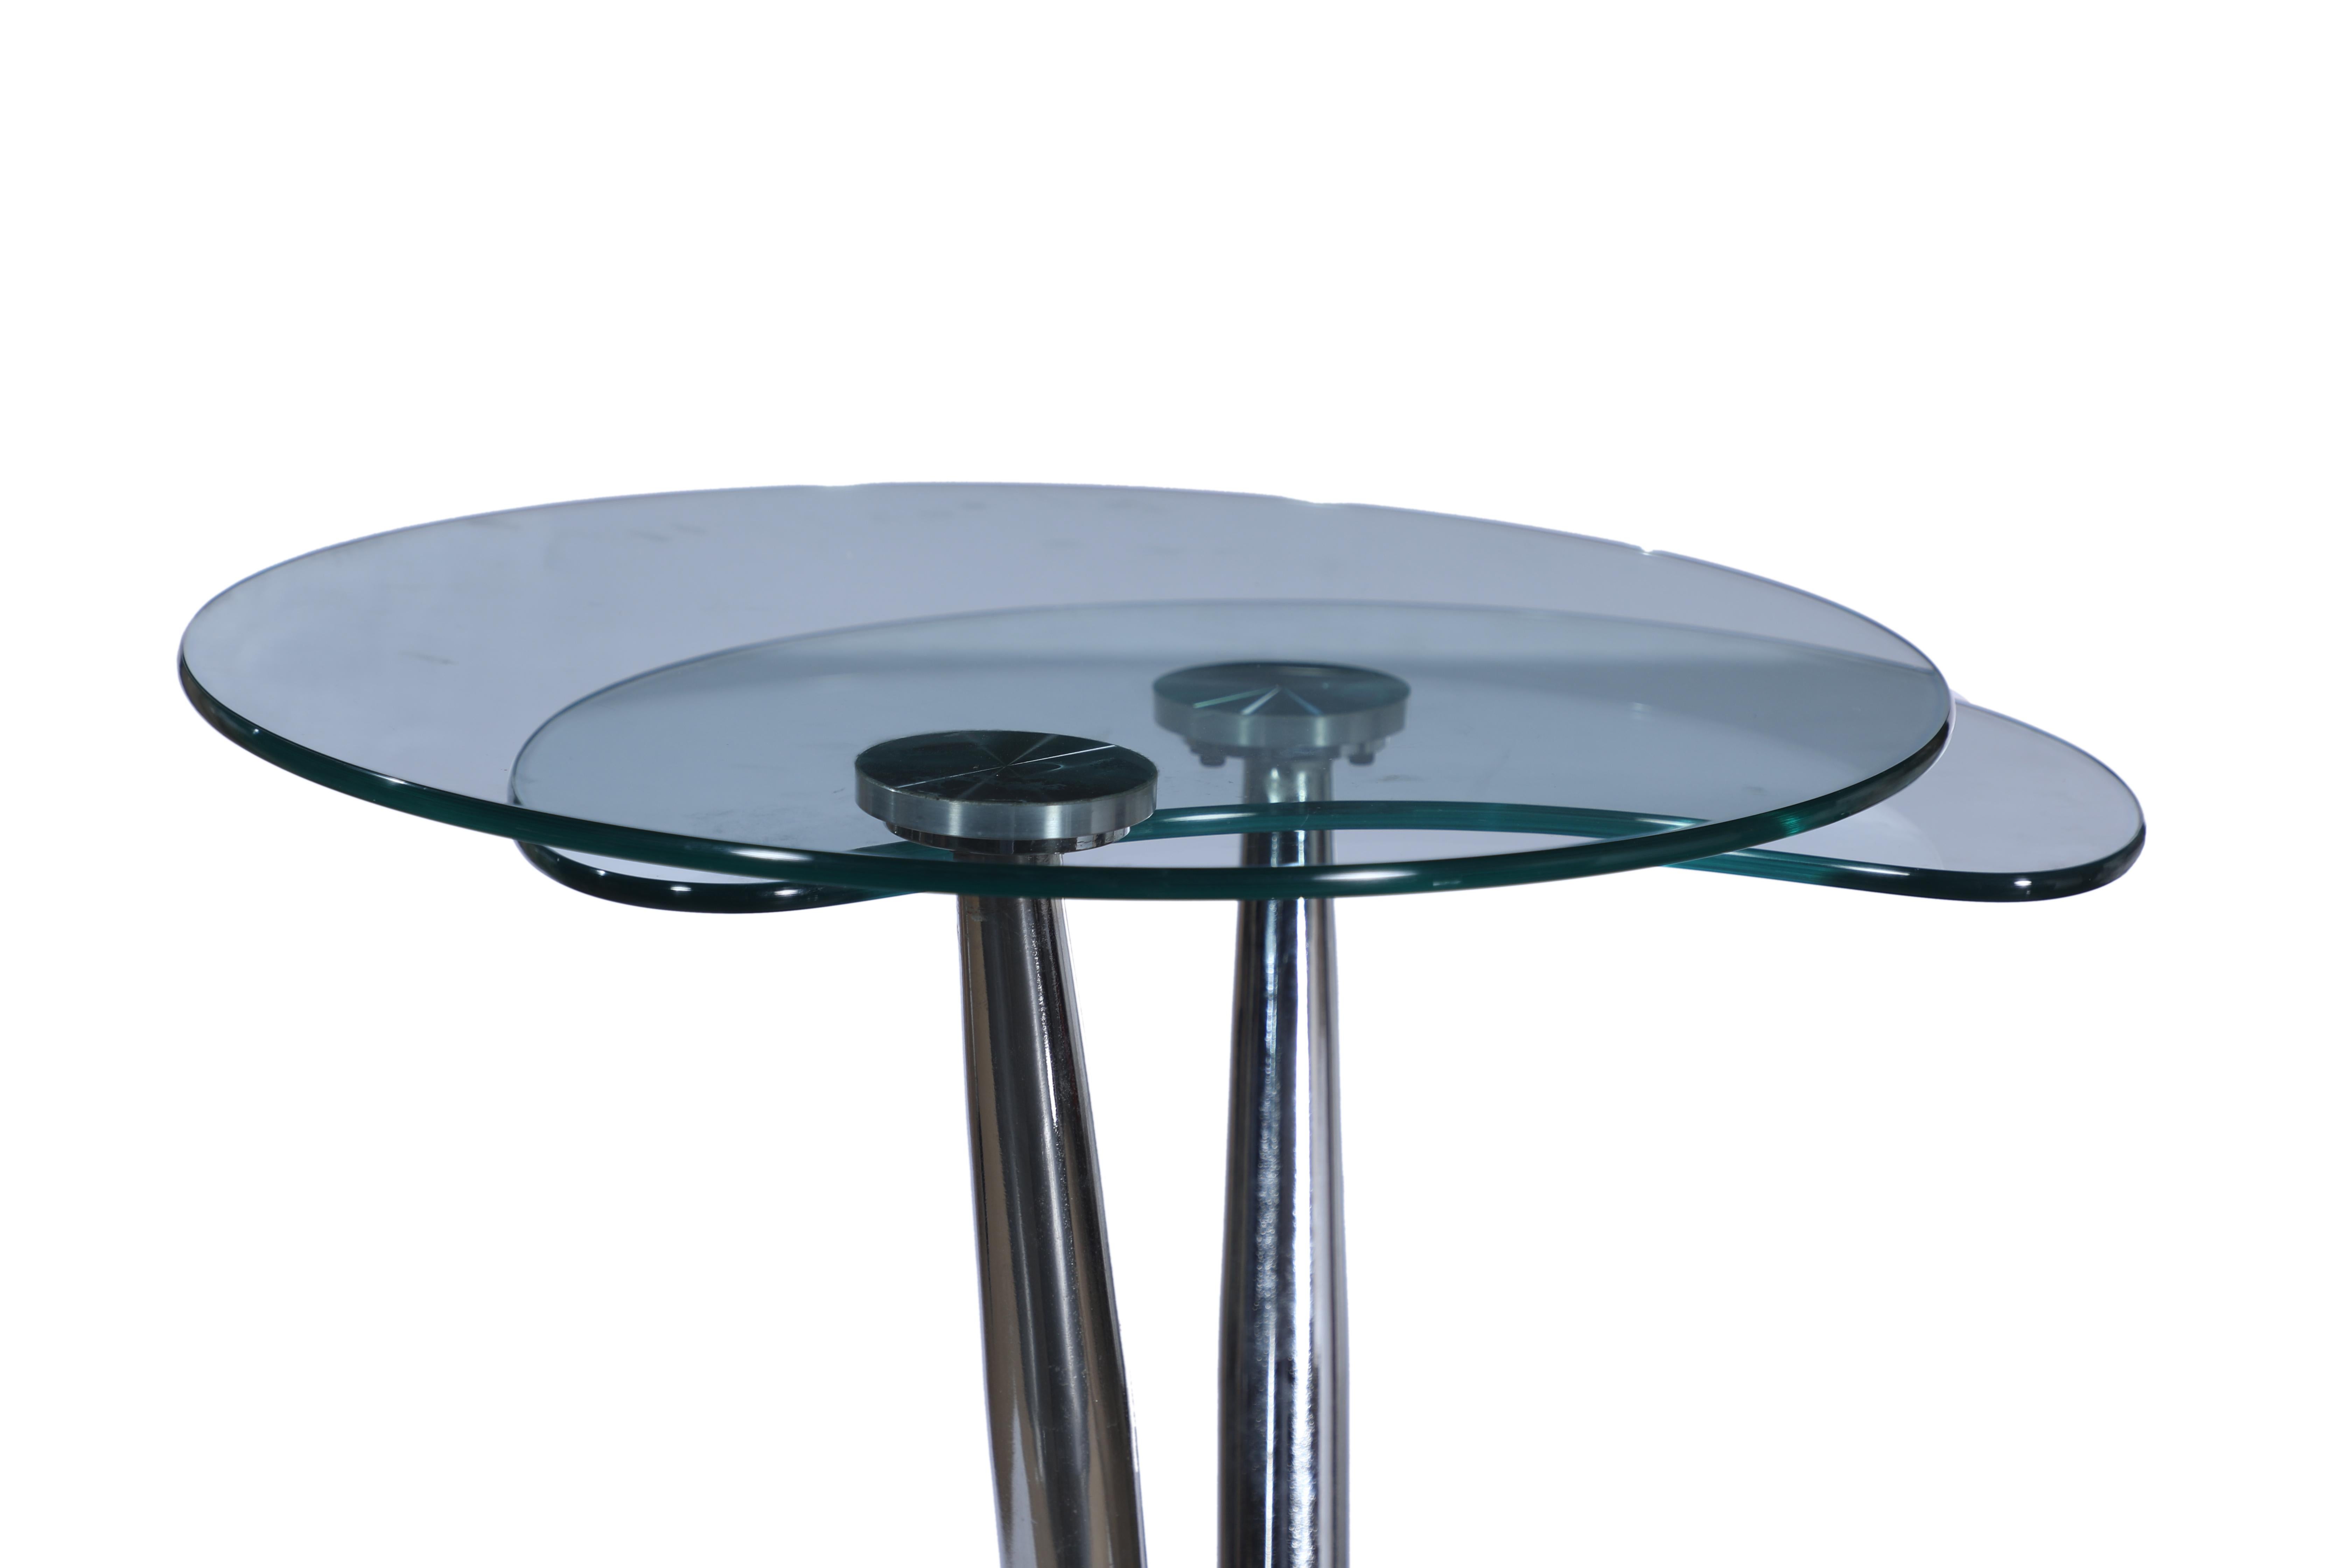 Chrome, Wood and Glass Swivel and Expanding High Top Table with Four Bar Stools In Excellent Condition For Sale In Nantucket, MA